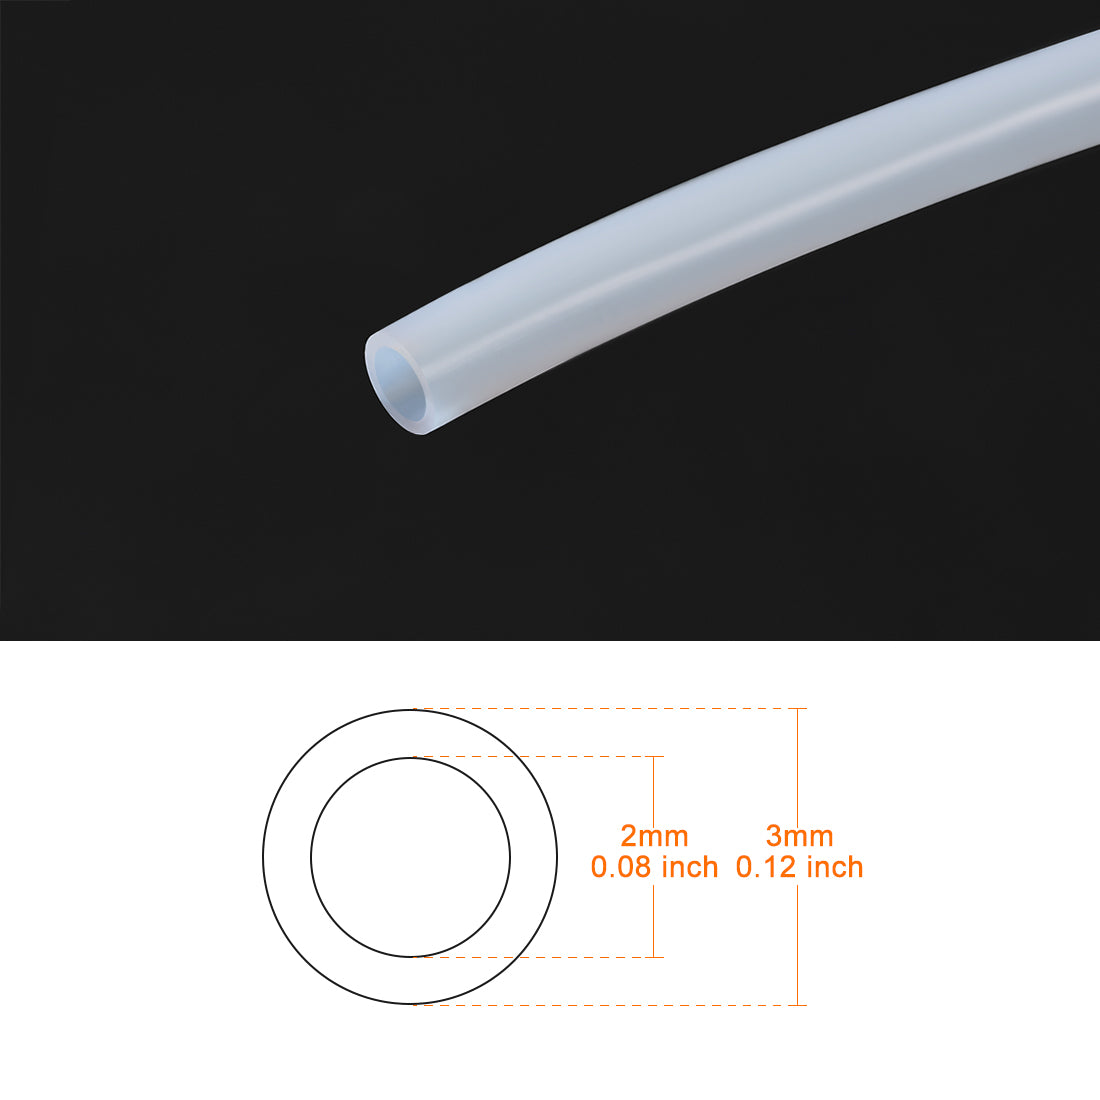 uxcell Uxcell PTFE Tube Tubing 2mm ID 3mm OD for 3D Printer RepRap 5 Meter 16.4ft Lengh Pipe